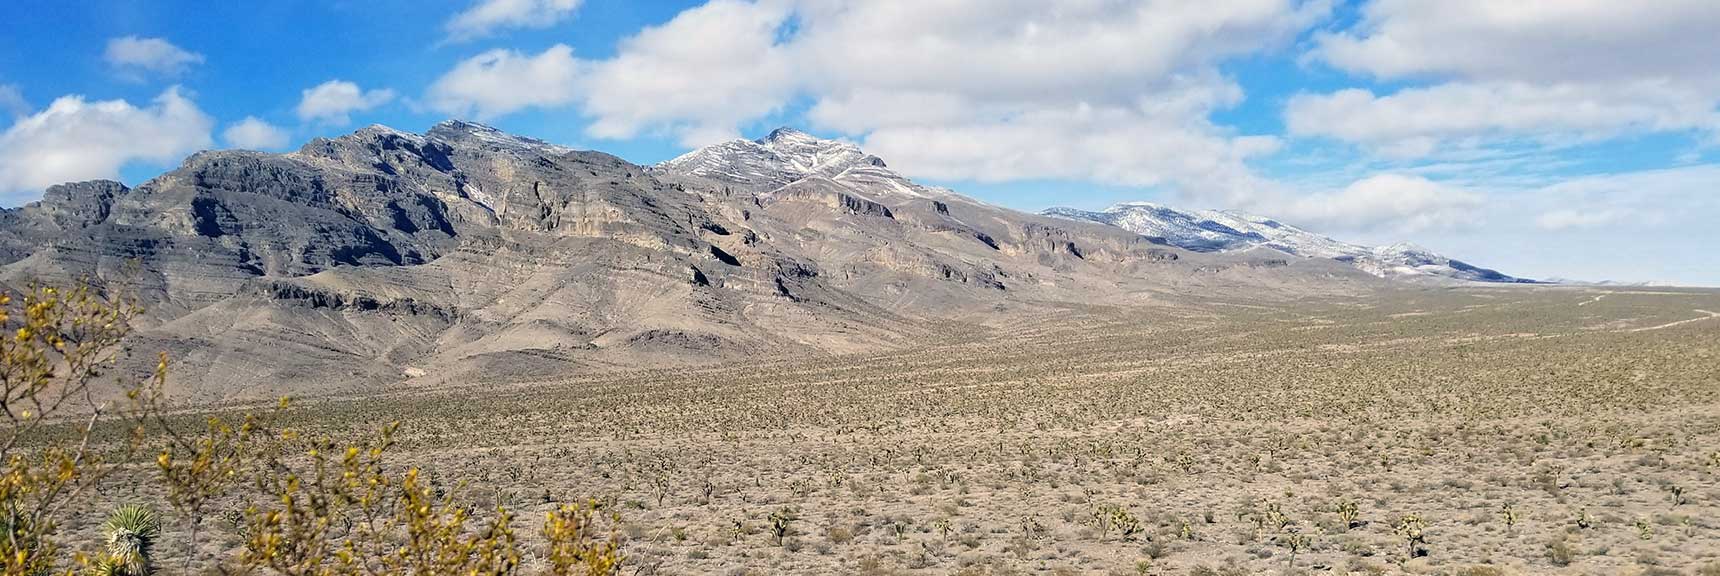 View of the East Side of the Sheep Range in the Desert National Wildlife Refuge, Nevada